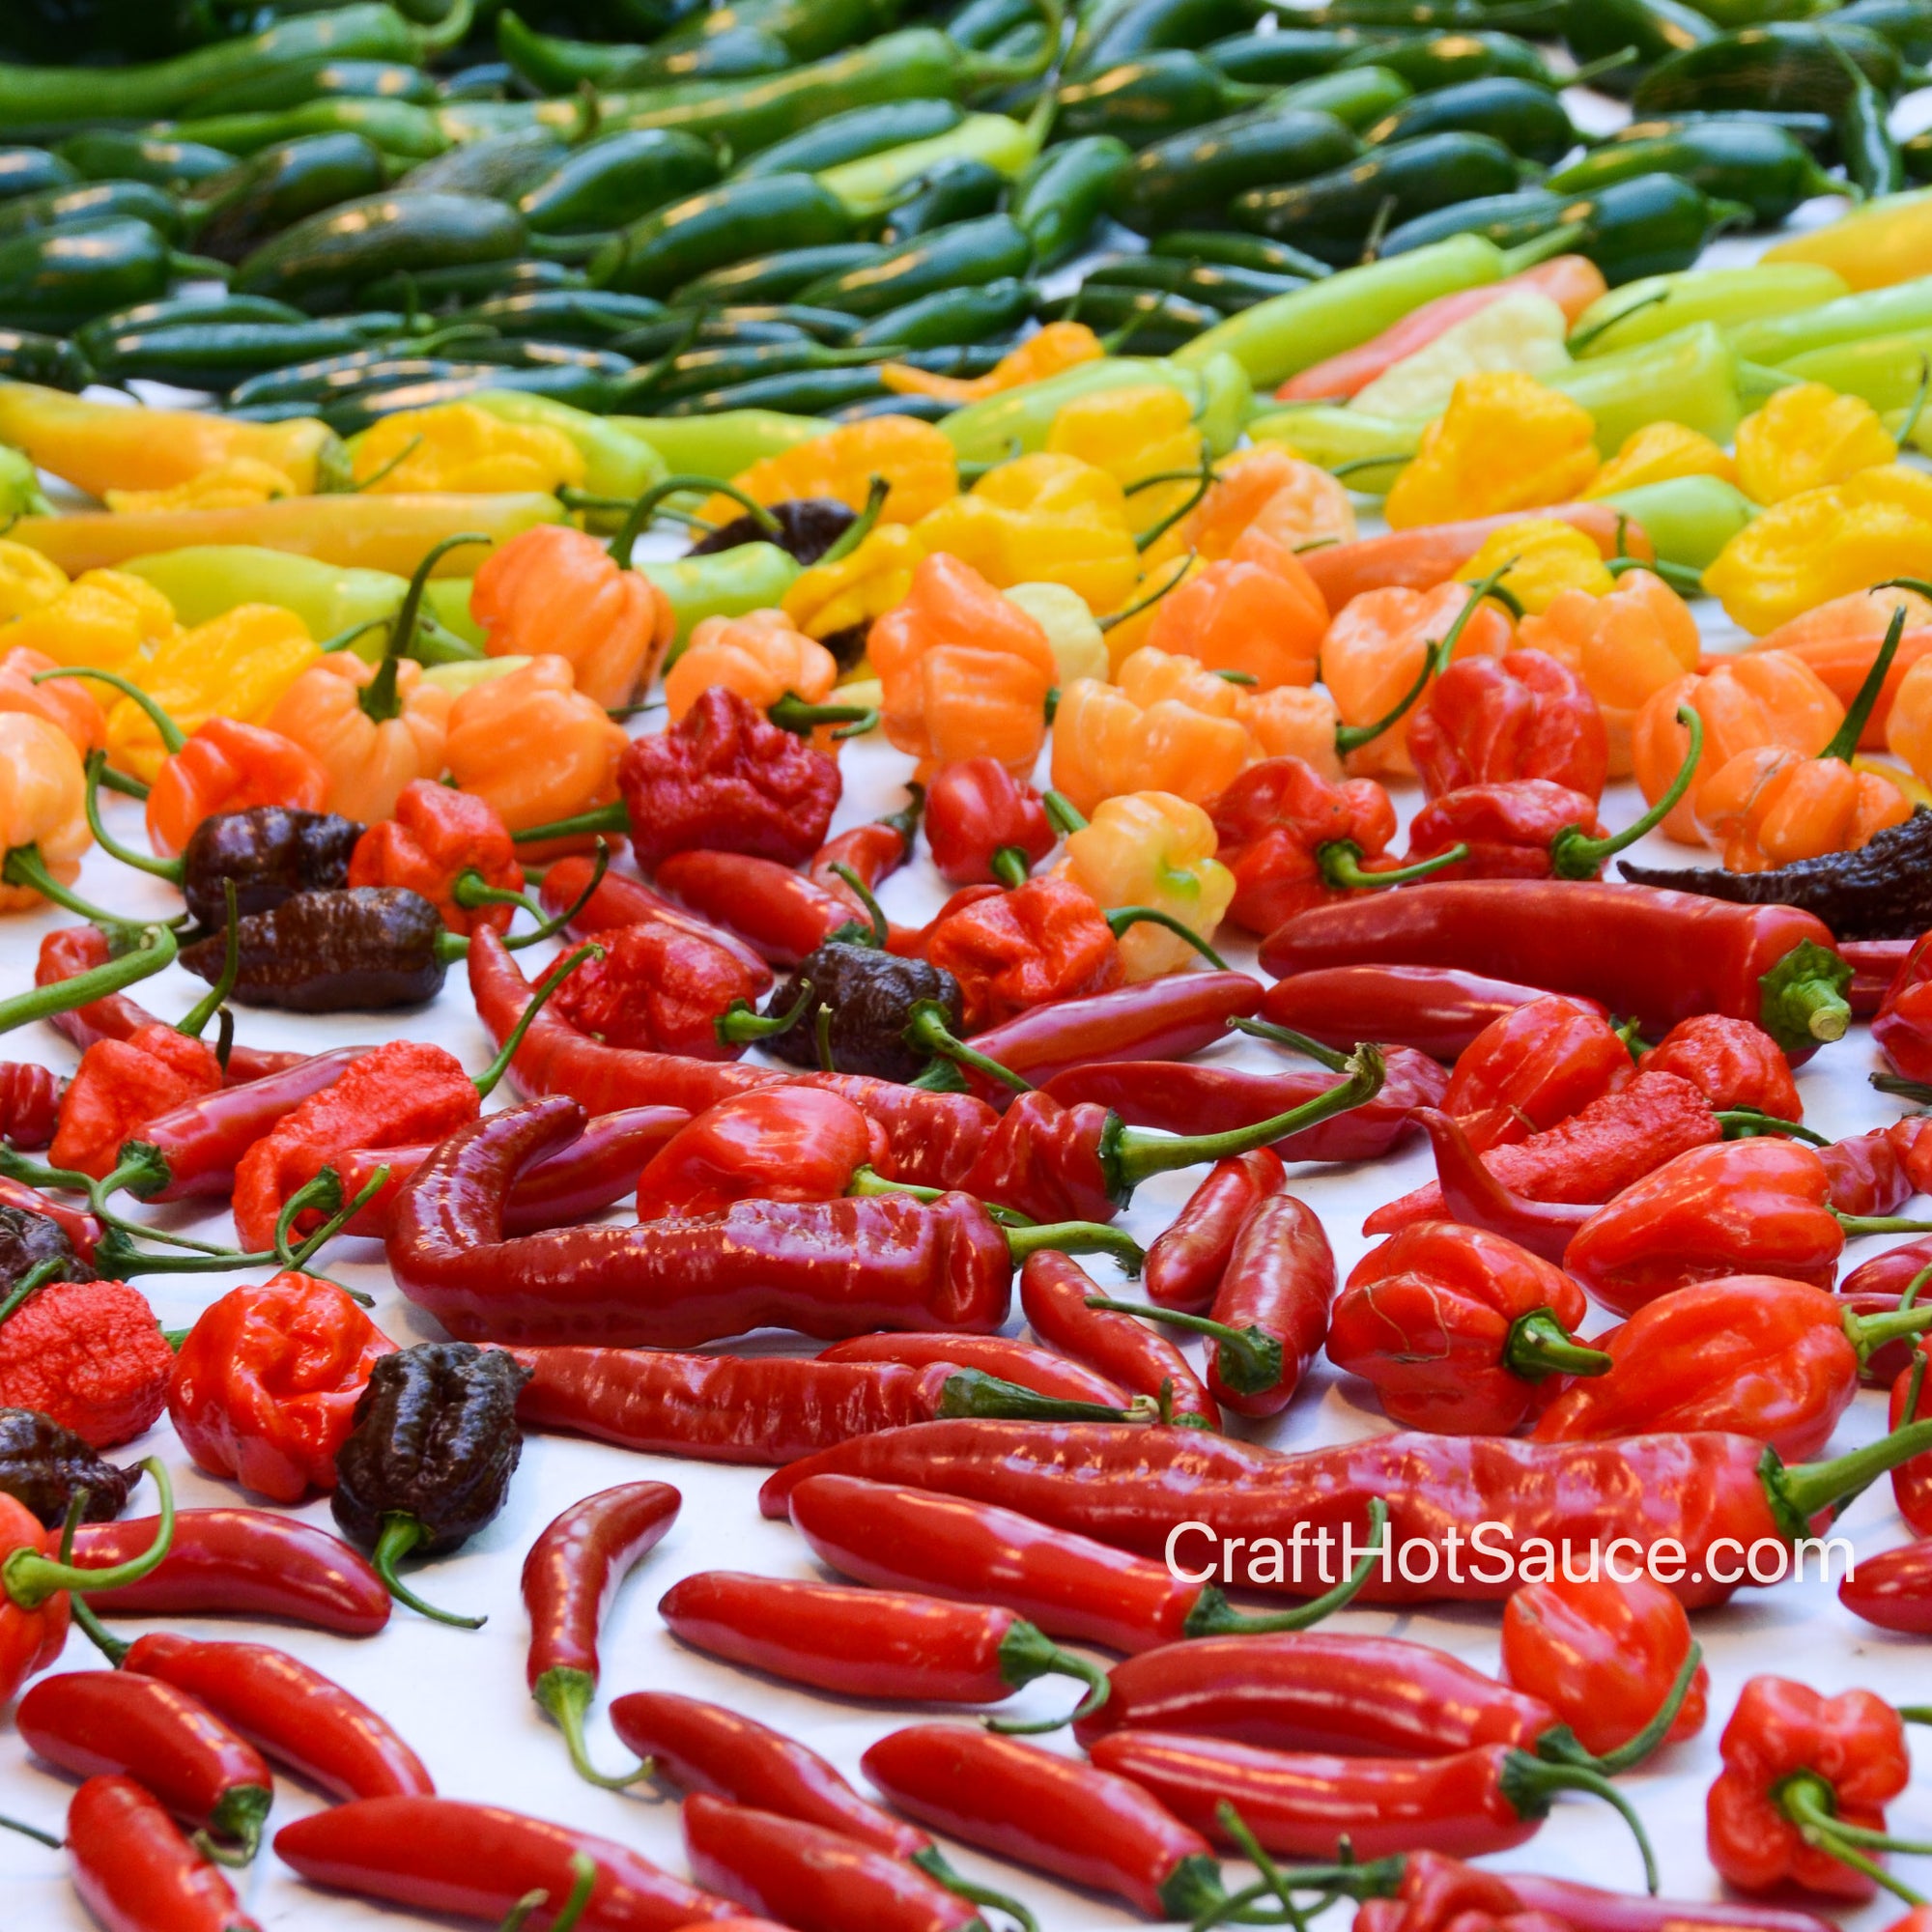 scoville scale for hot chili peppers